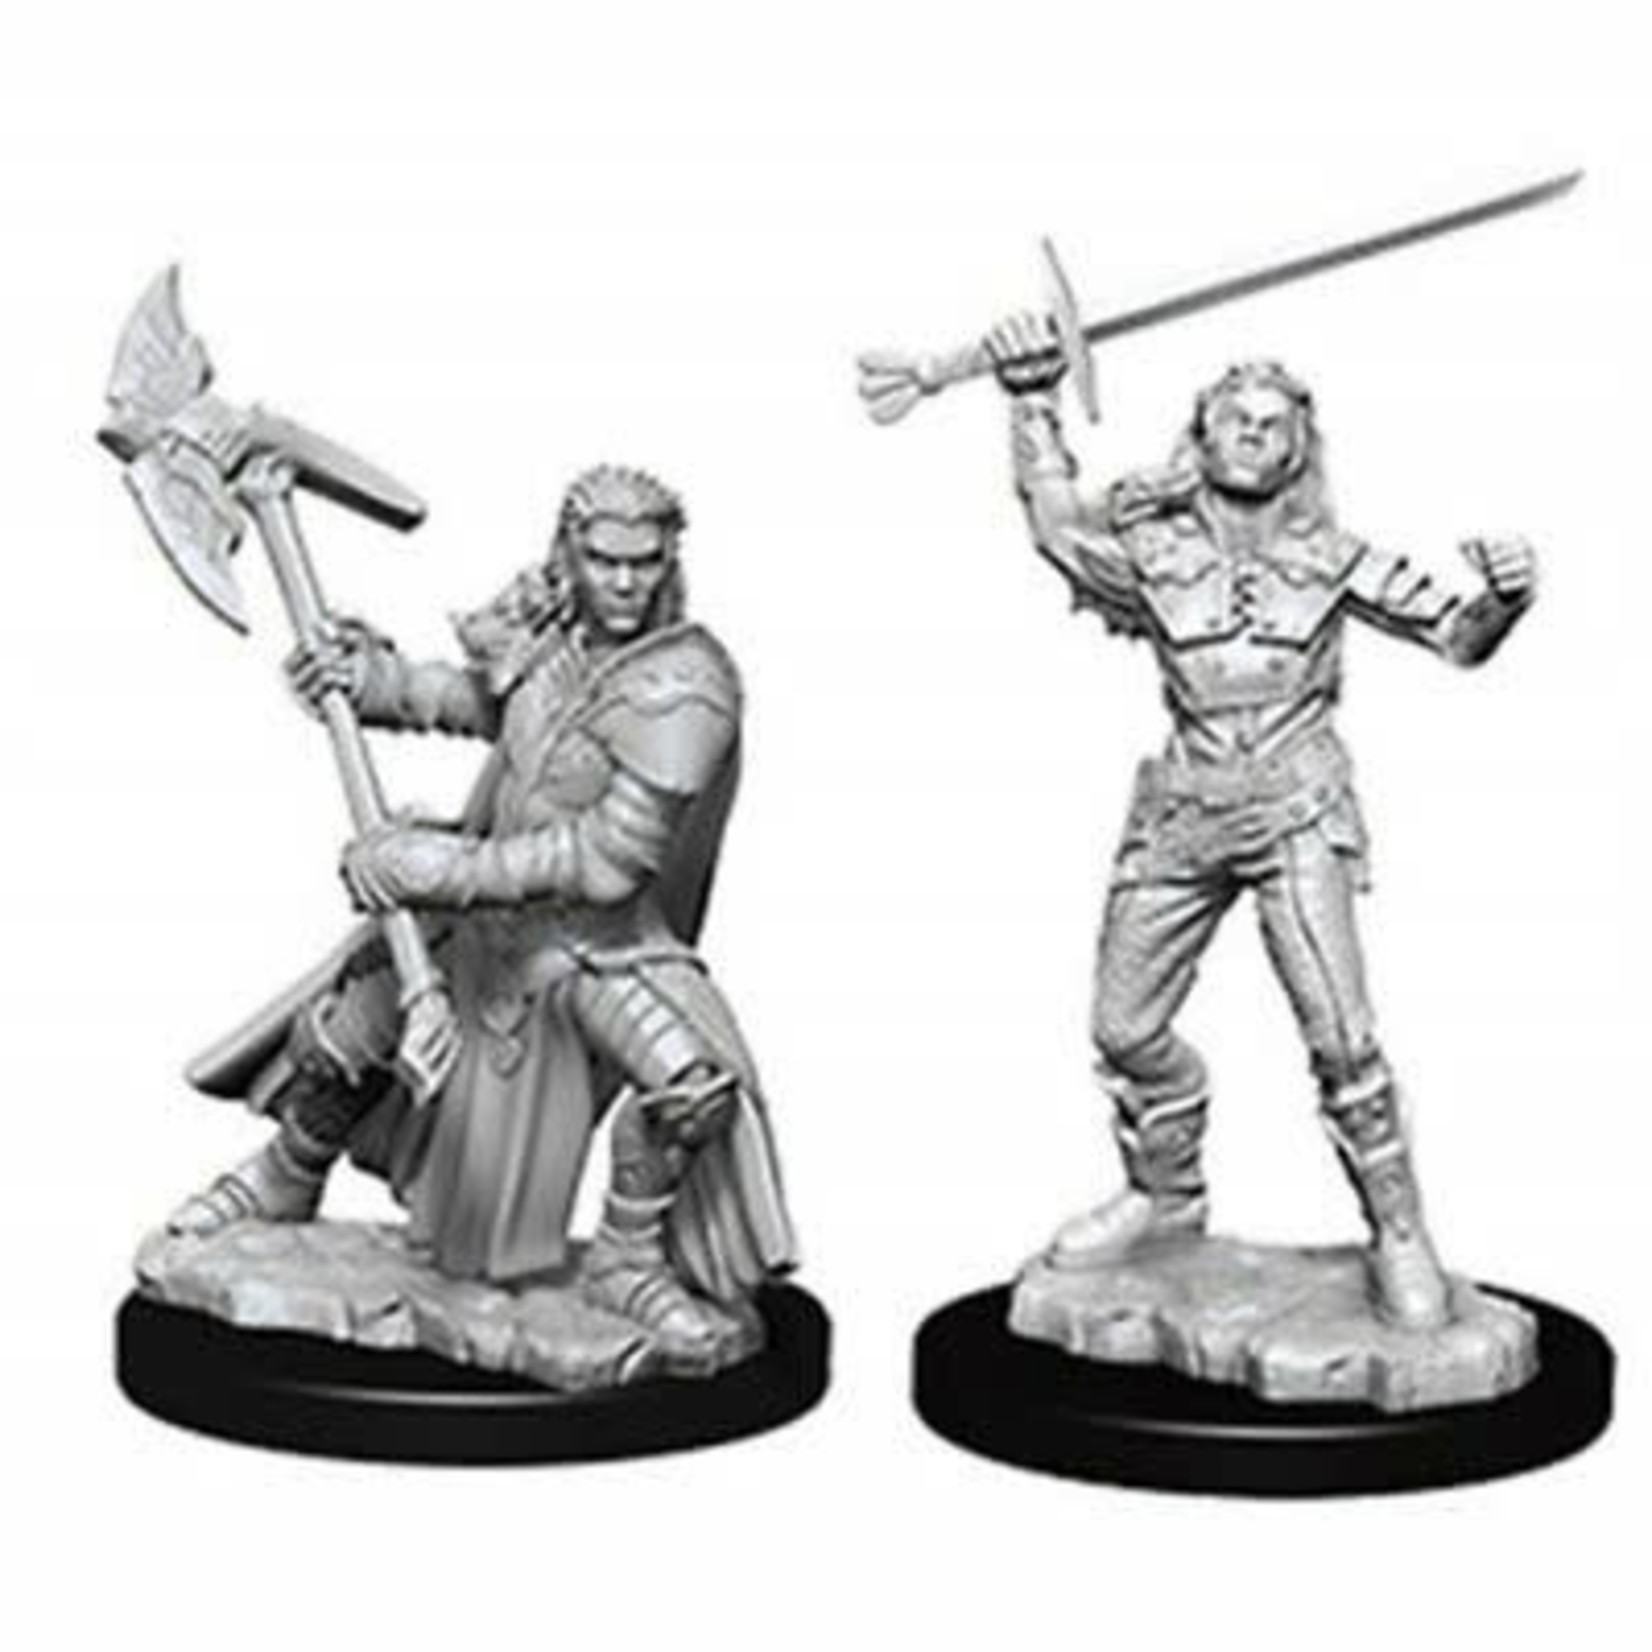 WizKids Dungeons and Dragons Nolzur's Marvelous Minis Female Half-Orc Fighter